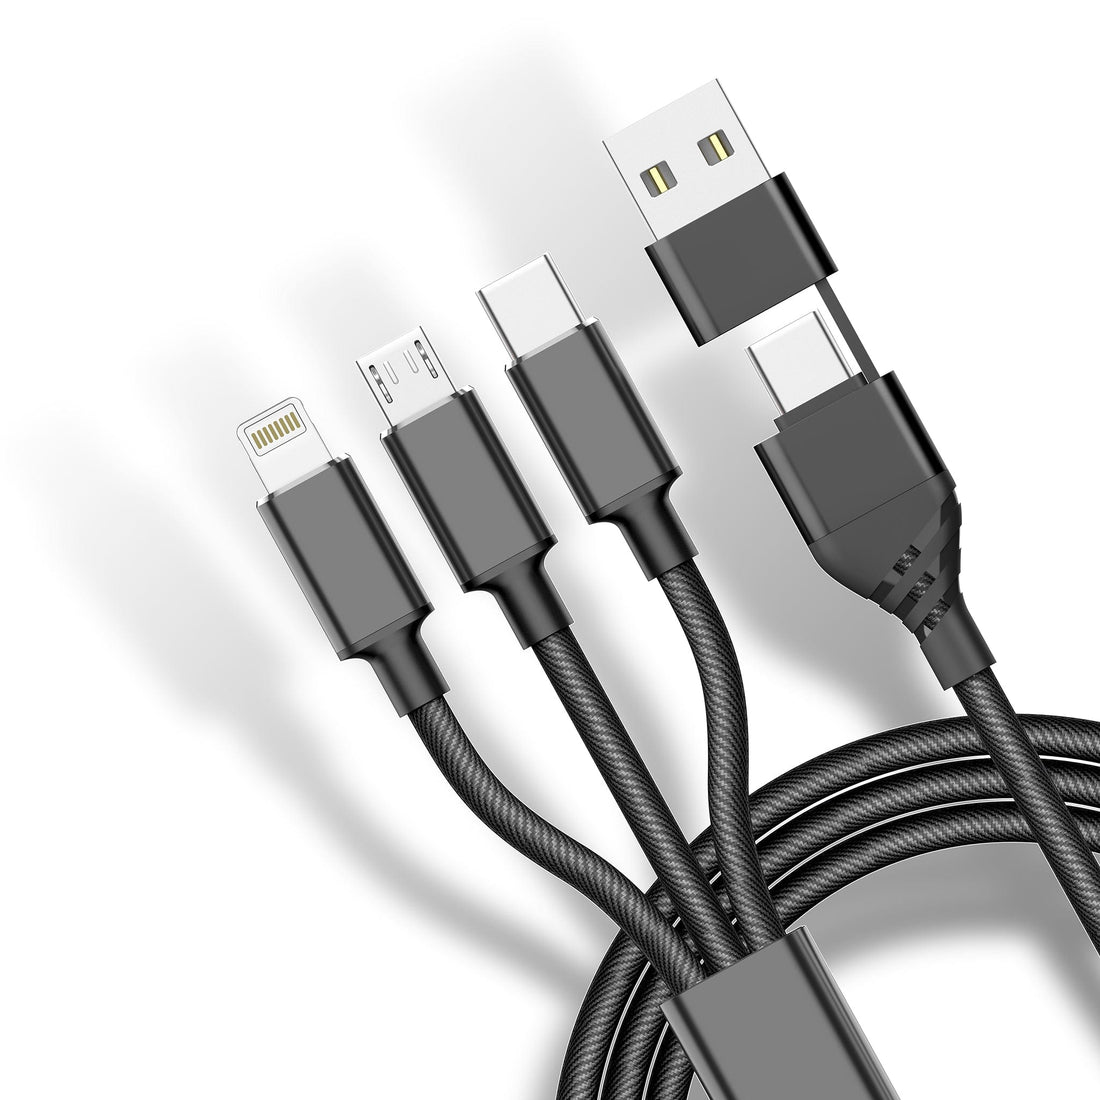 UK Technology 5-in-1 Charging Cable close up of the Lightning, USB C, Micro USB charging end and the USB-C/USB plug end